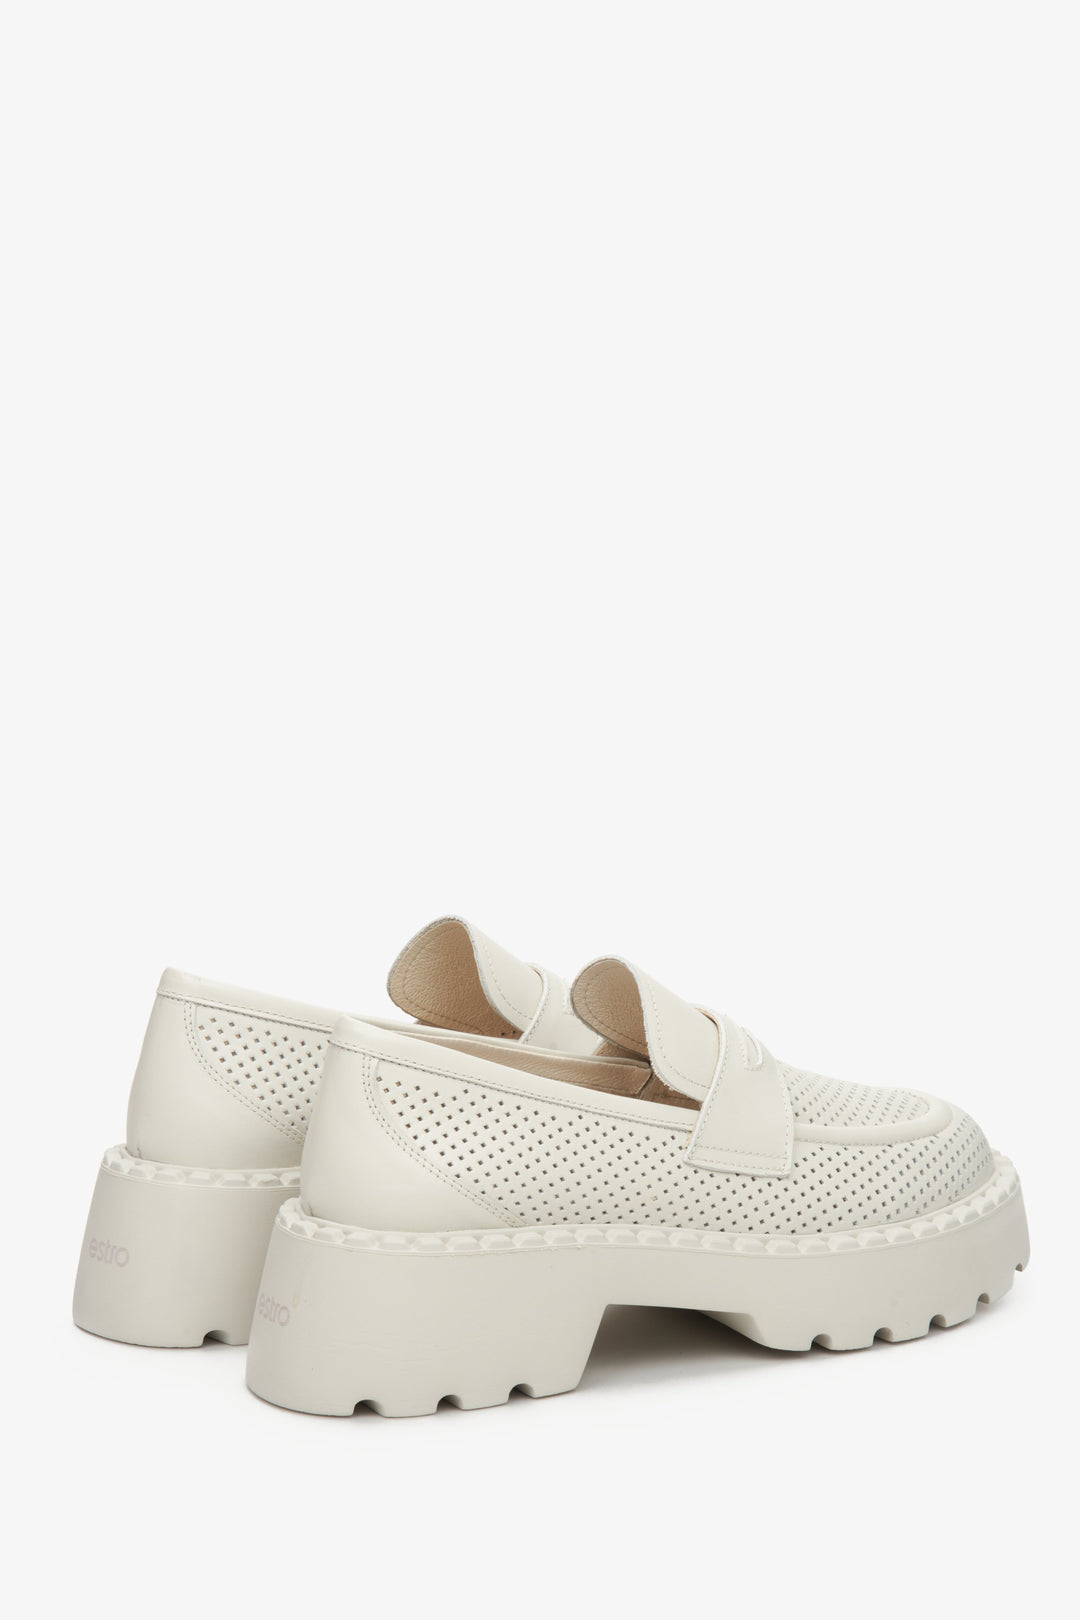 Leather moccasins for women in light beige of Estro brand with perforation for summer - the presentation of the heel and side seam of the shoes.